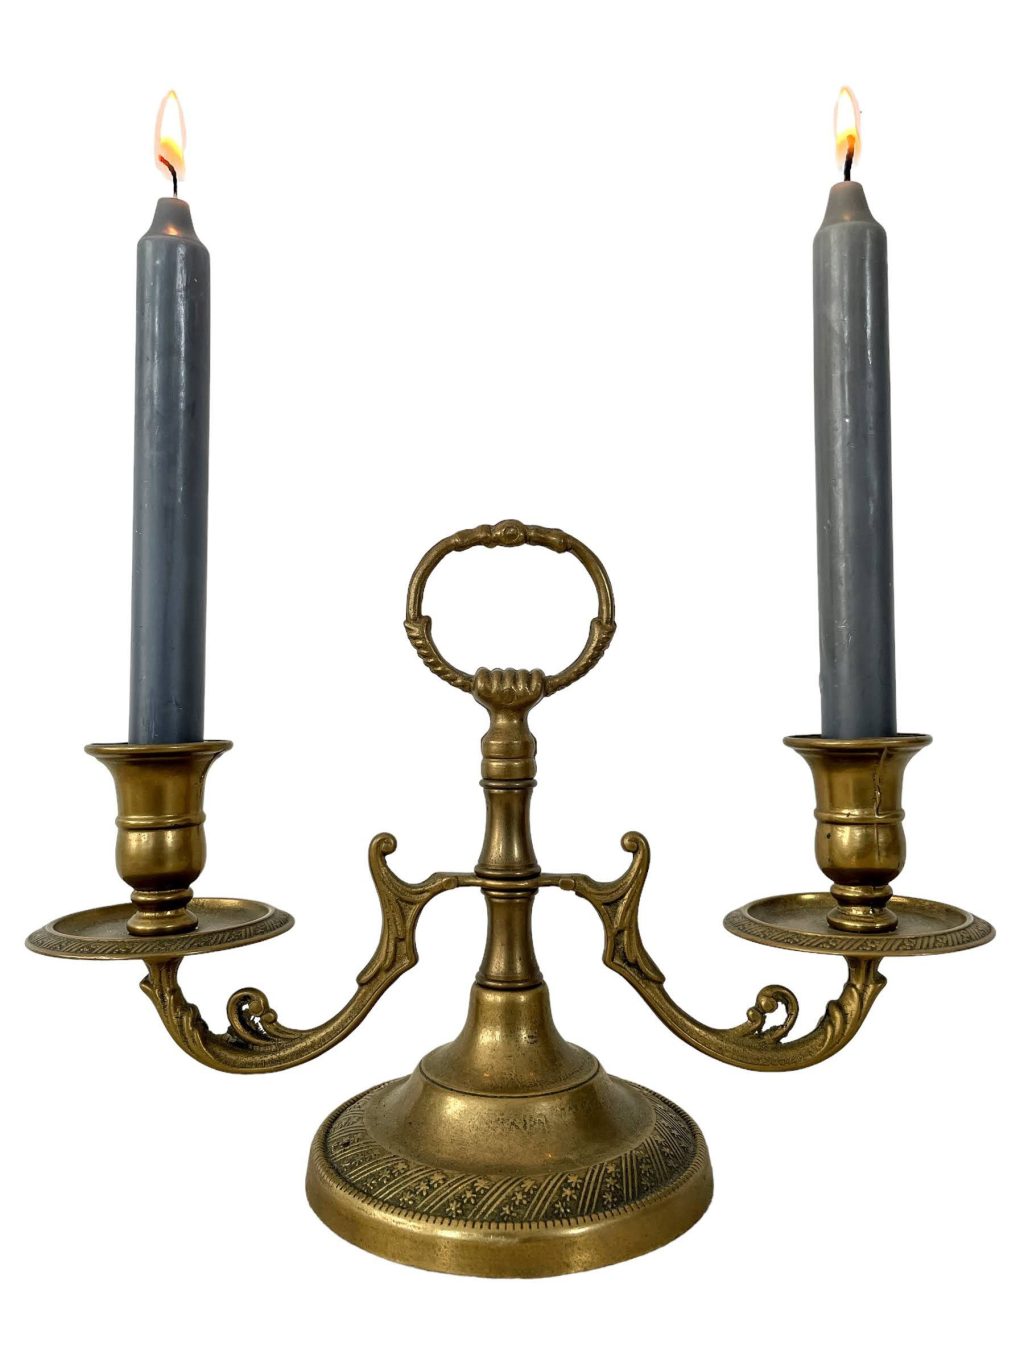 Vintage French Brass Candelabra Two Candles Light Lantern Candle Lamp Decor Design c1960-70’s